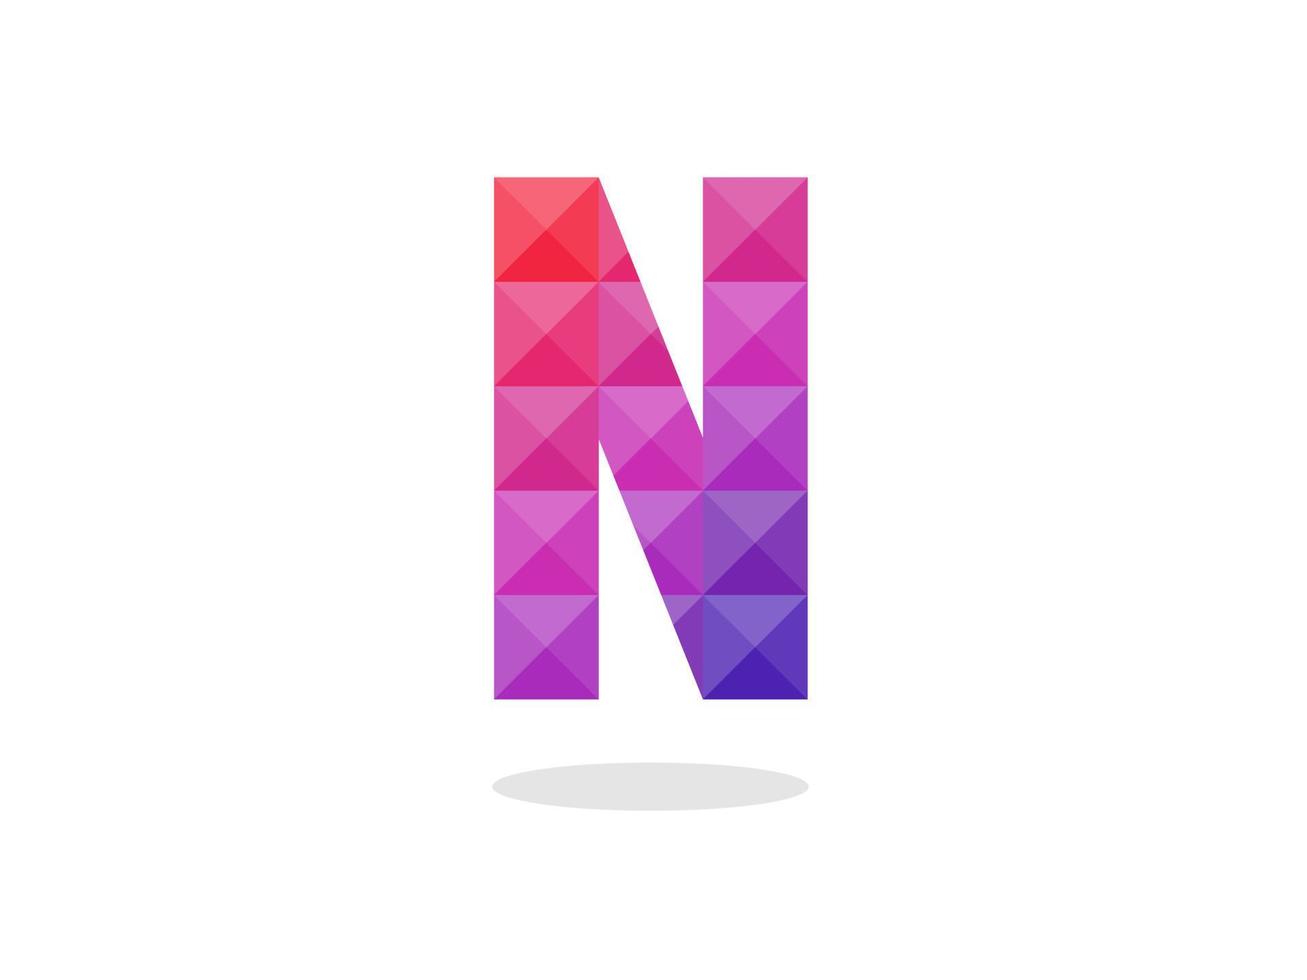 Geometric Letter N logo with perfect combination of red-blue colors. vector